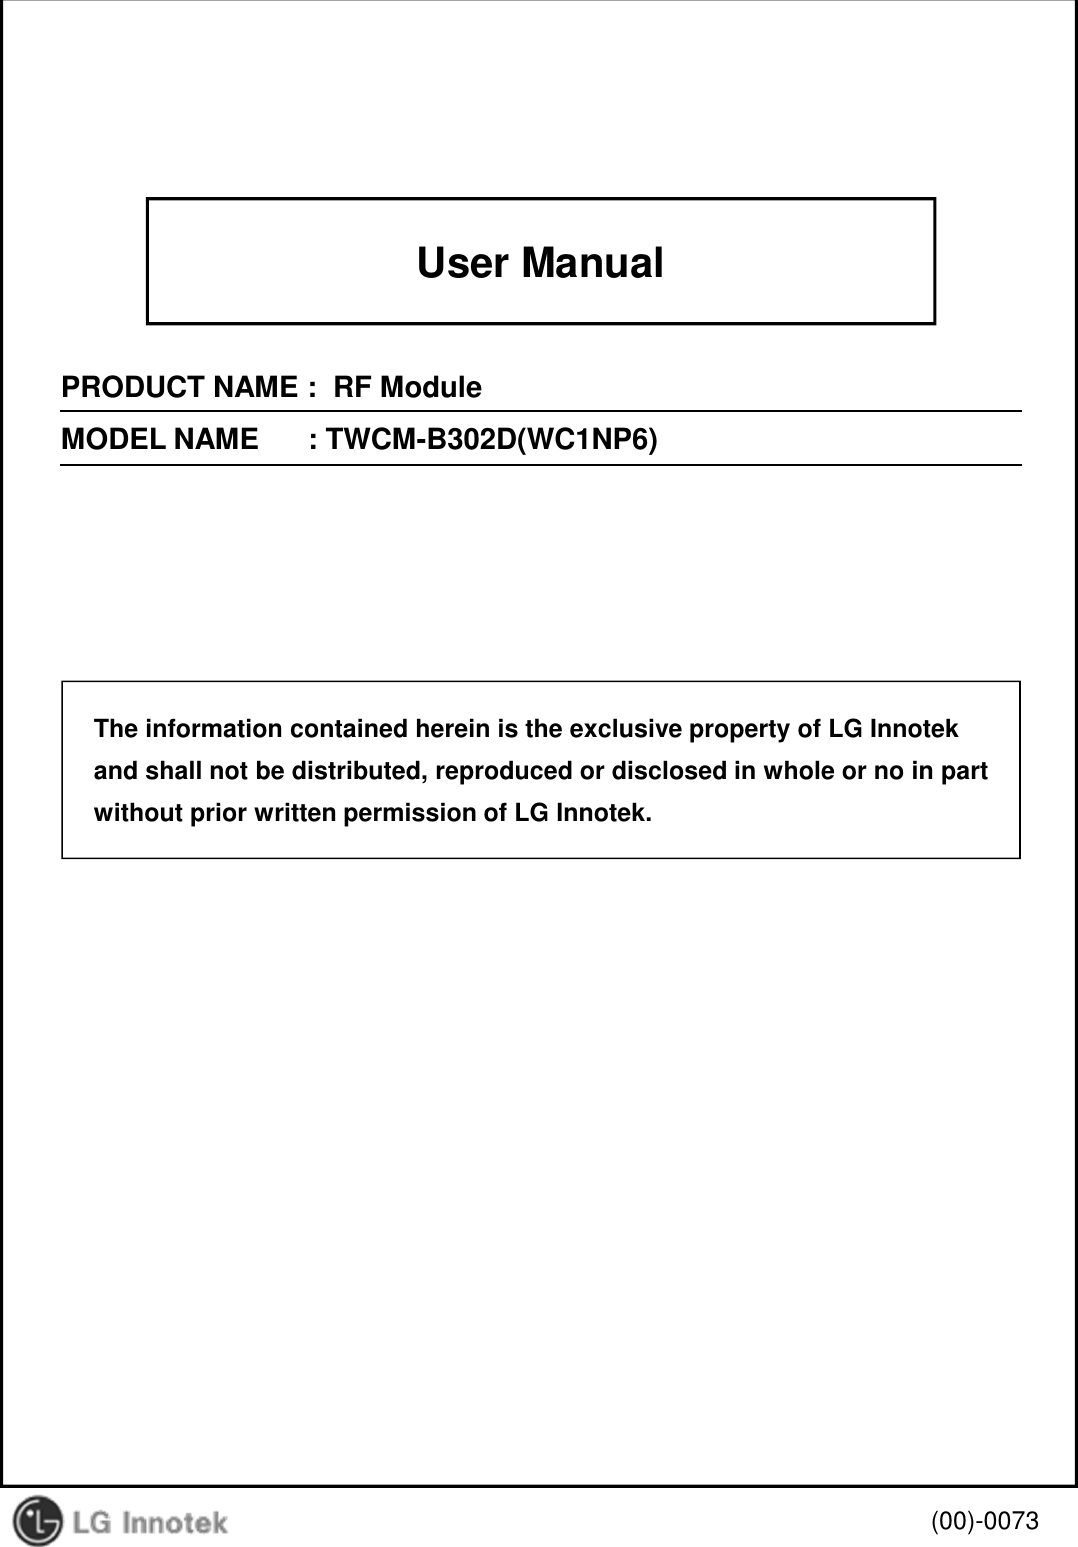 User ManualPRODUCT NAME :  RF ModuleMODEL NAME      : TWCM-B302D(WC1NP6)(00)-0073The information contained herein is the exclusive property of LG Innotekand shall not be distributed, reproduced or disclosed in whole or no in partwithout prior written permission of LG Innotek.